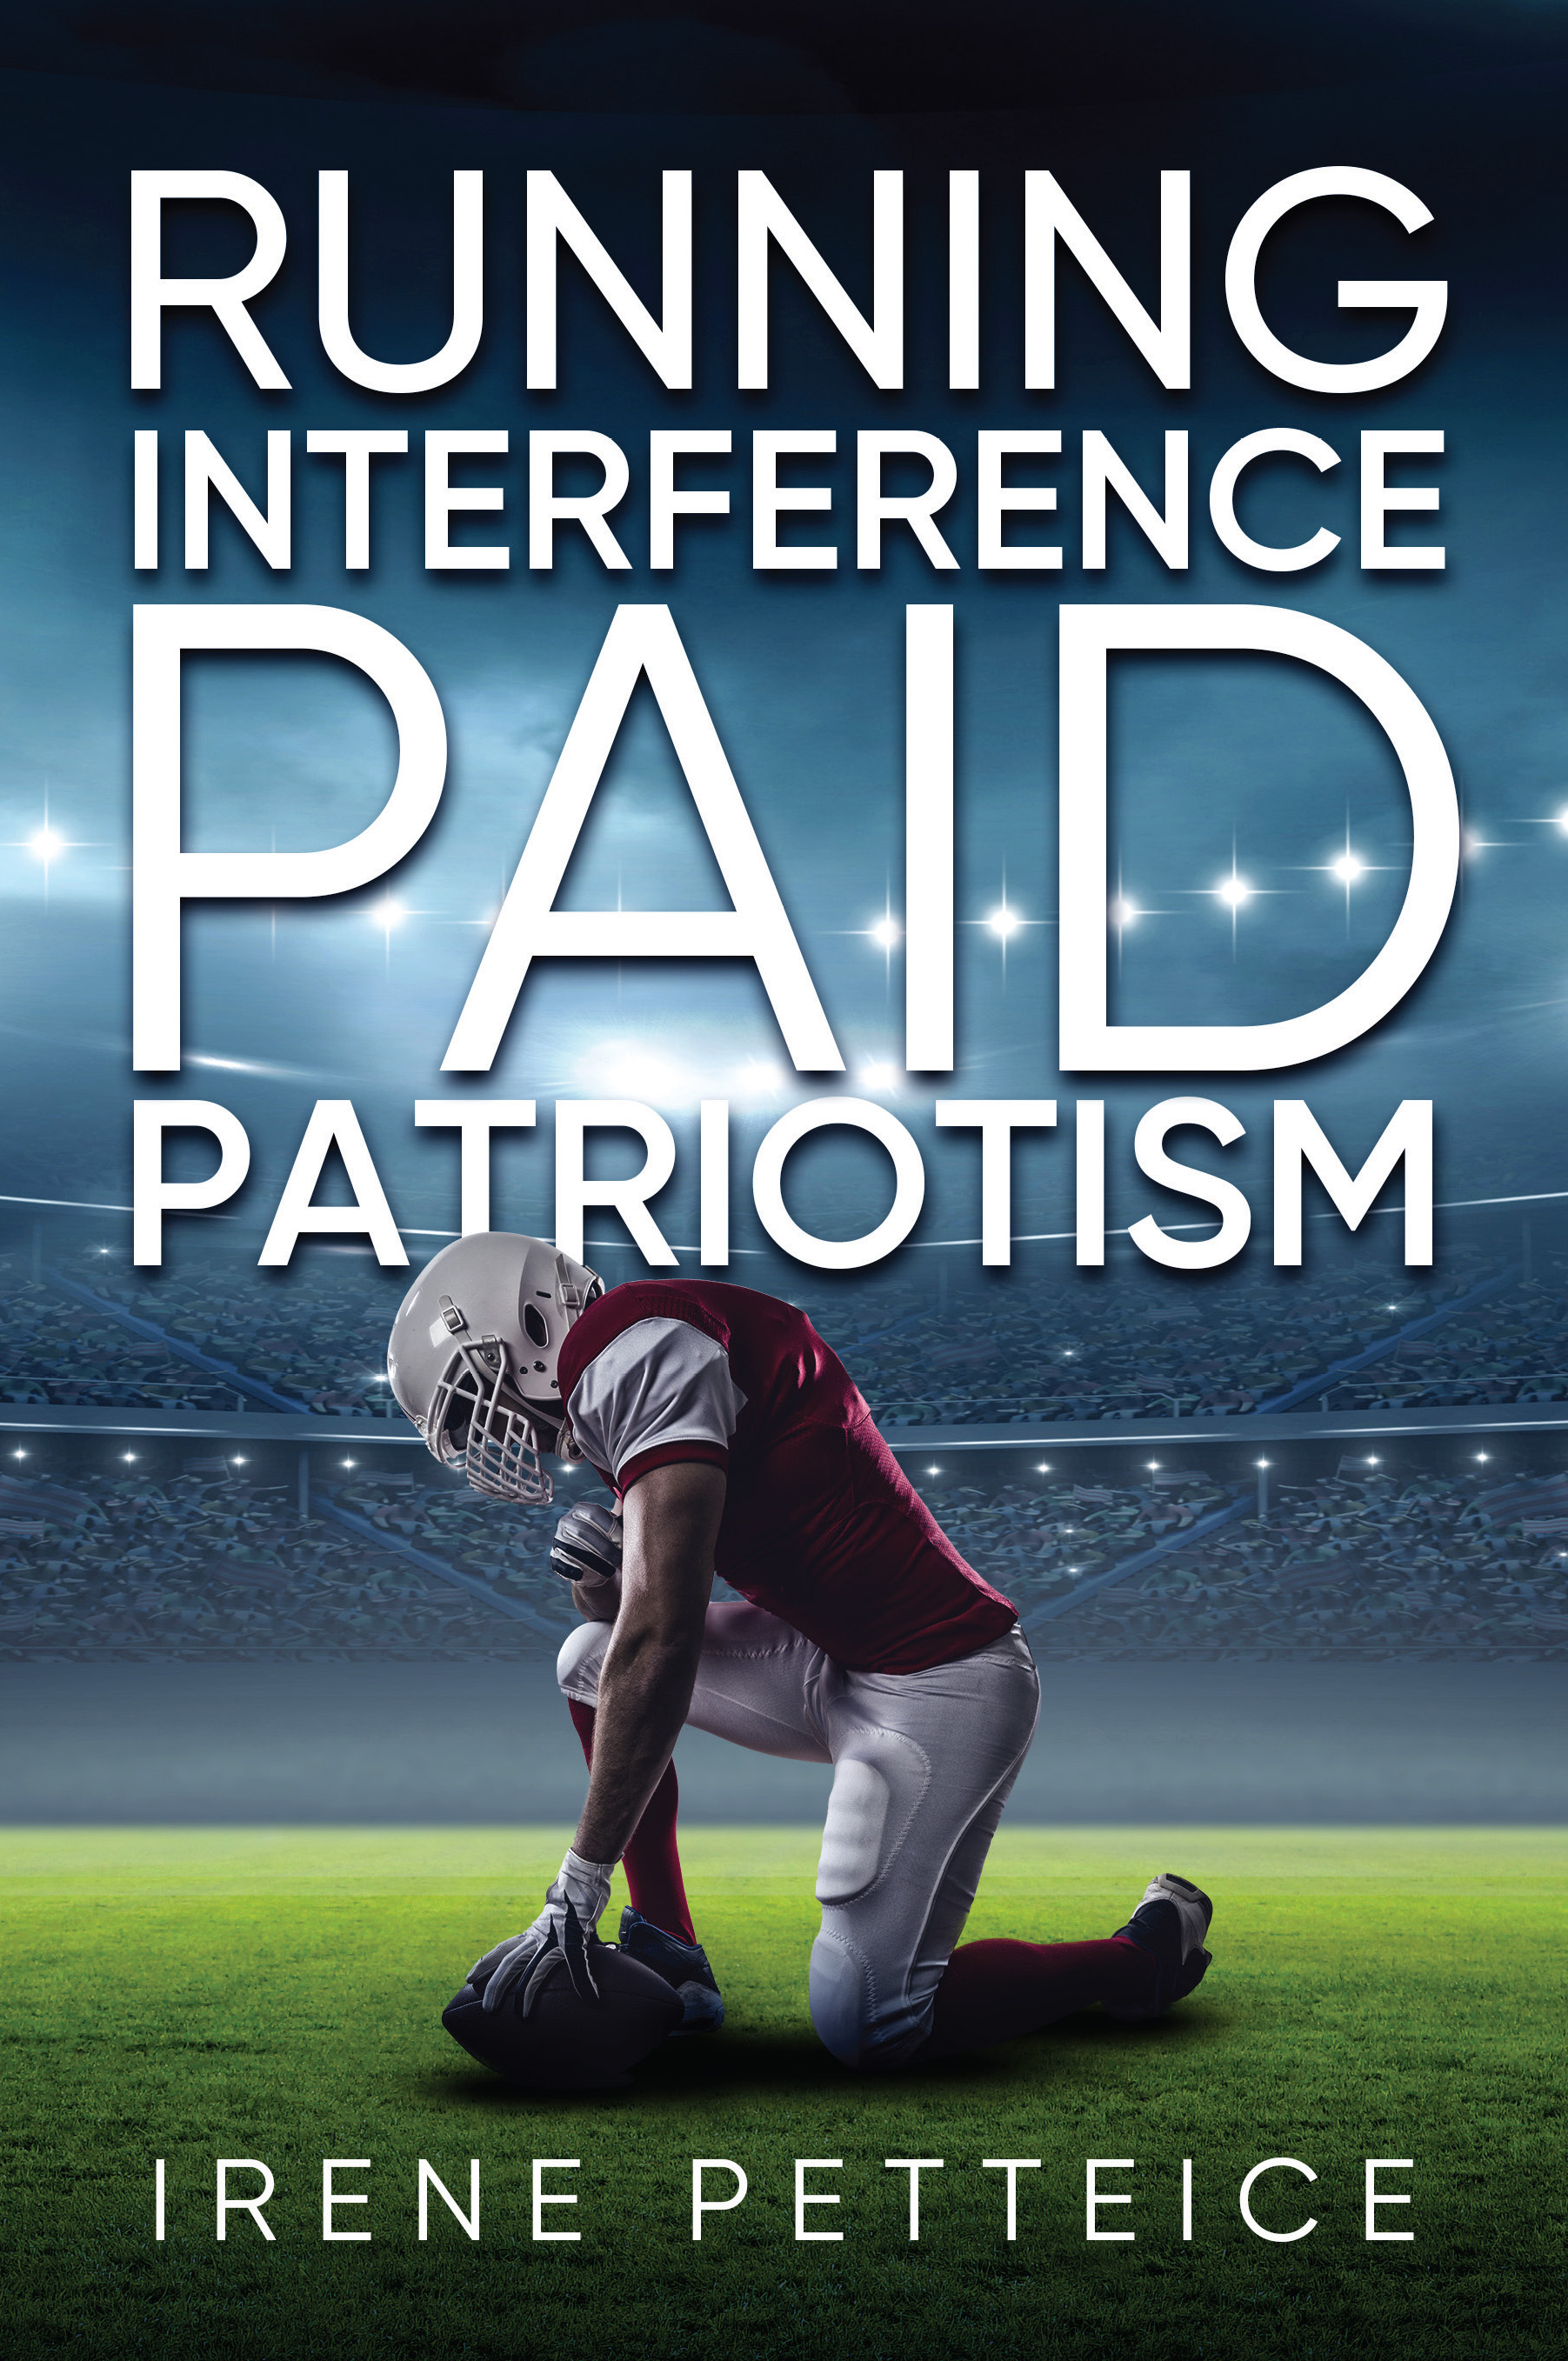 Running Interference: Paid Patriotism by Author Irene Petteice